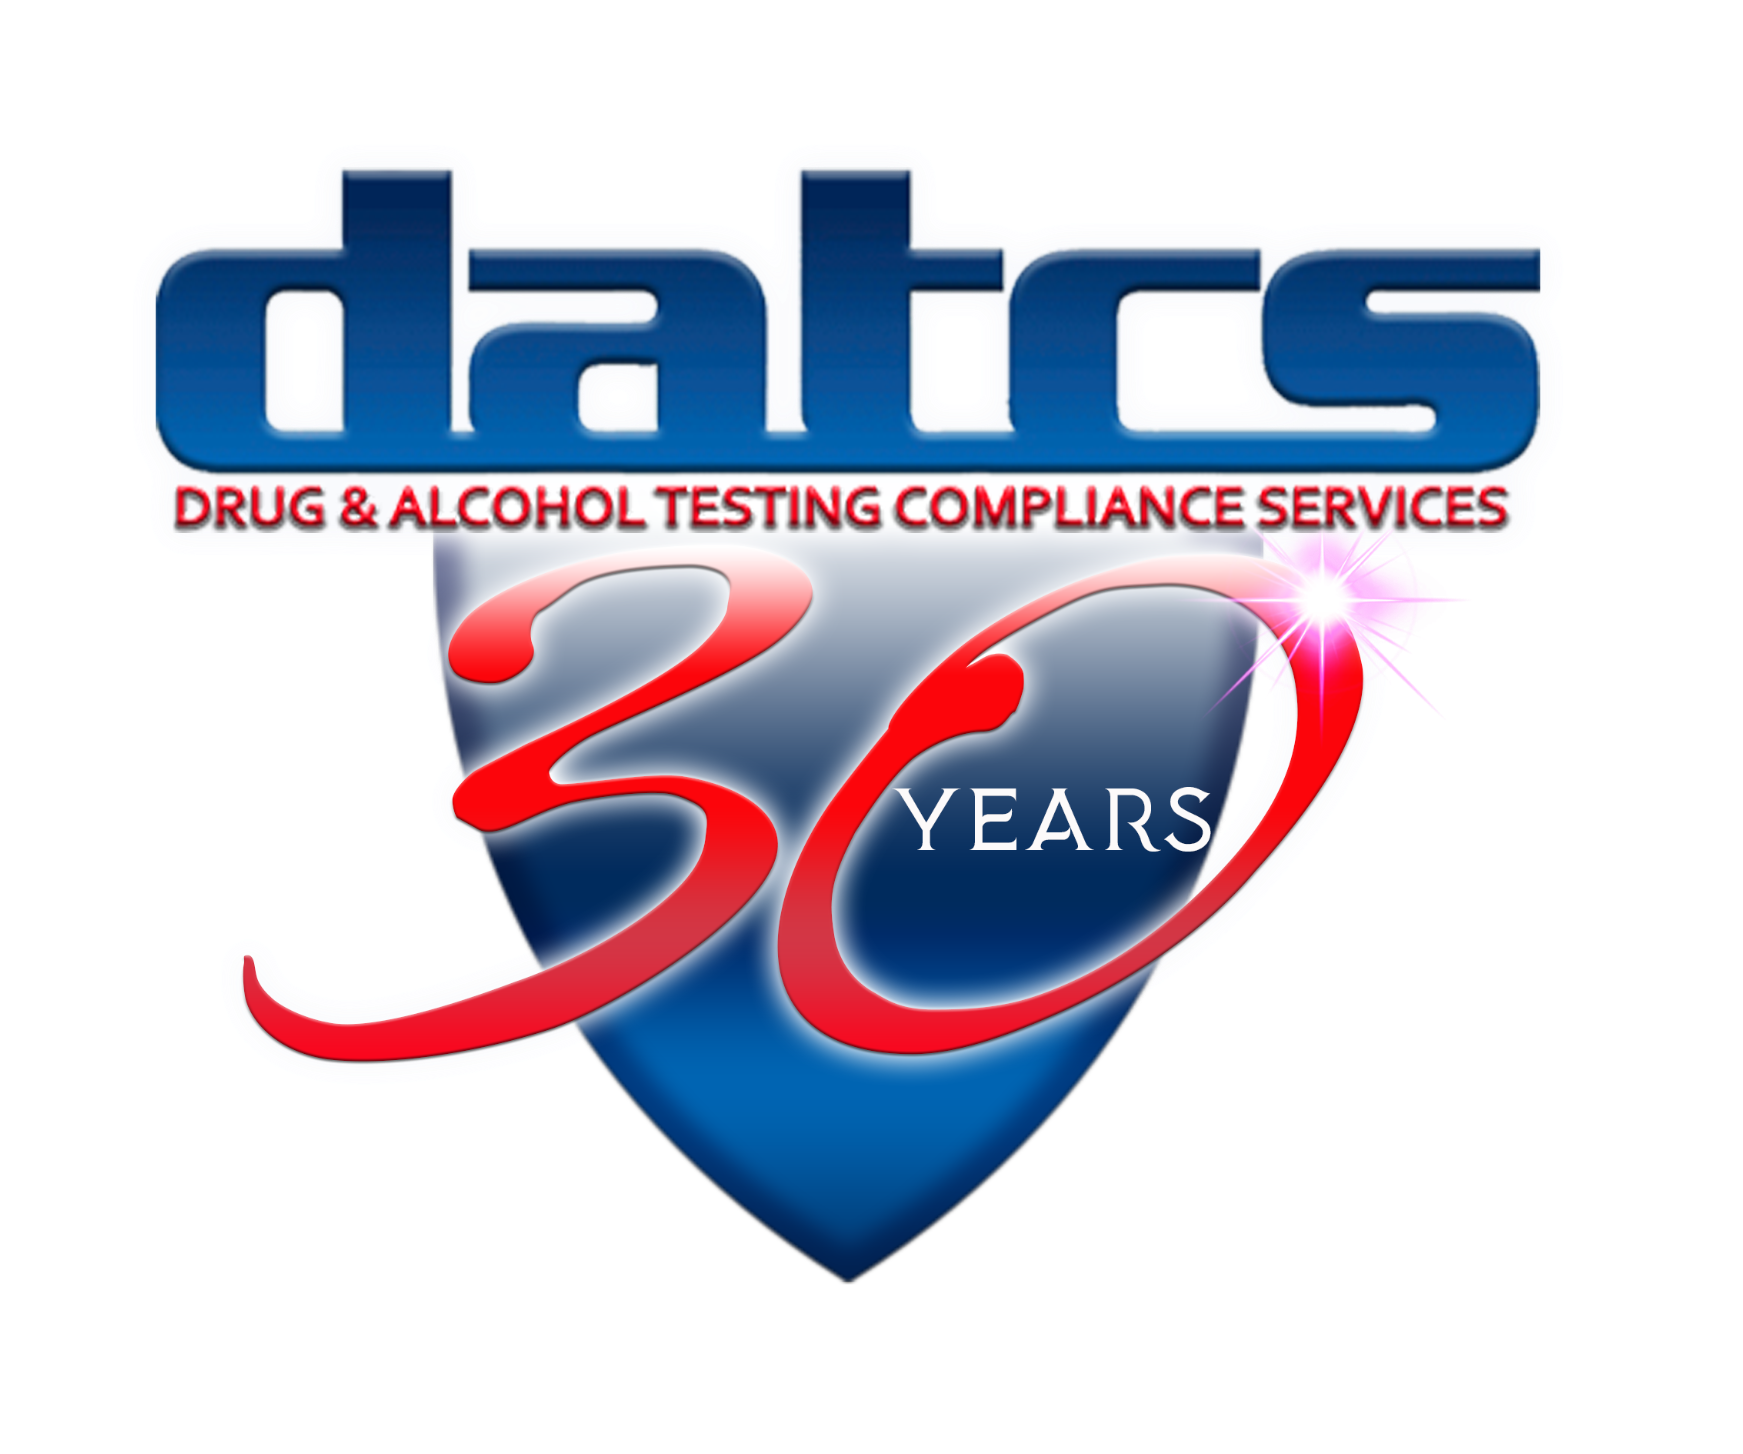 Drug & Alcohol Testing Compliance Services